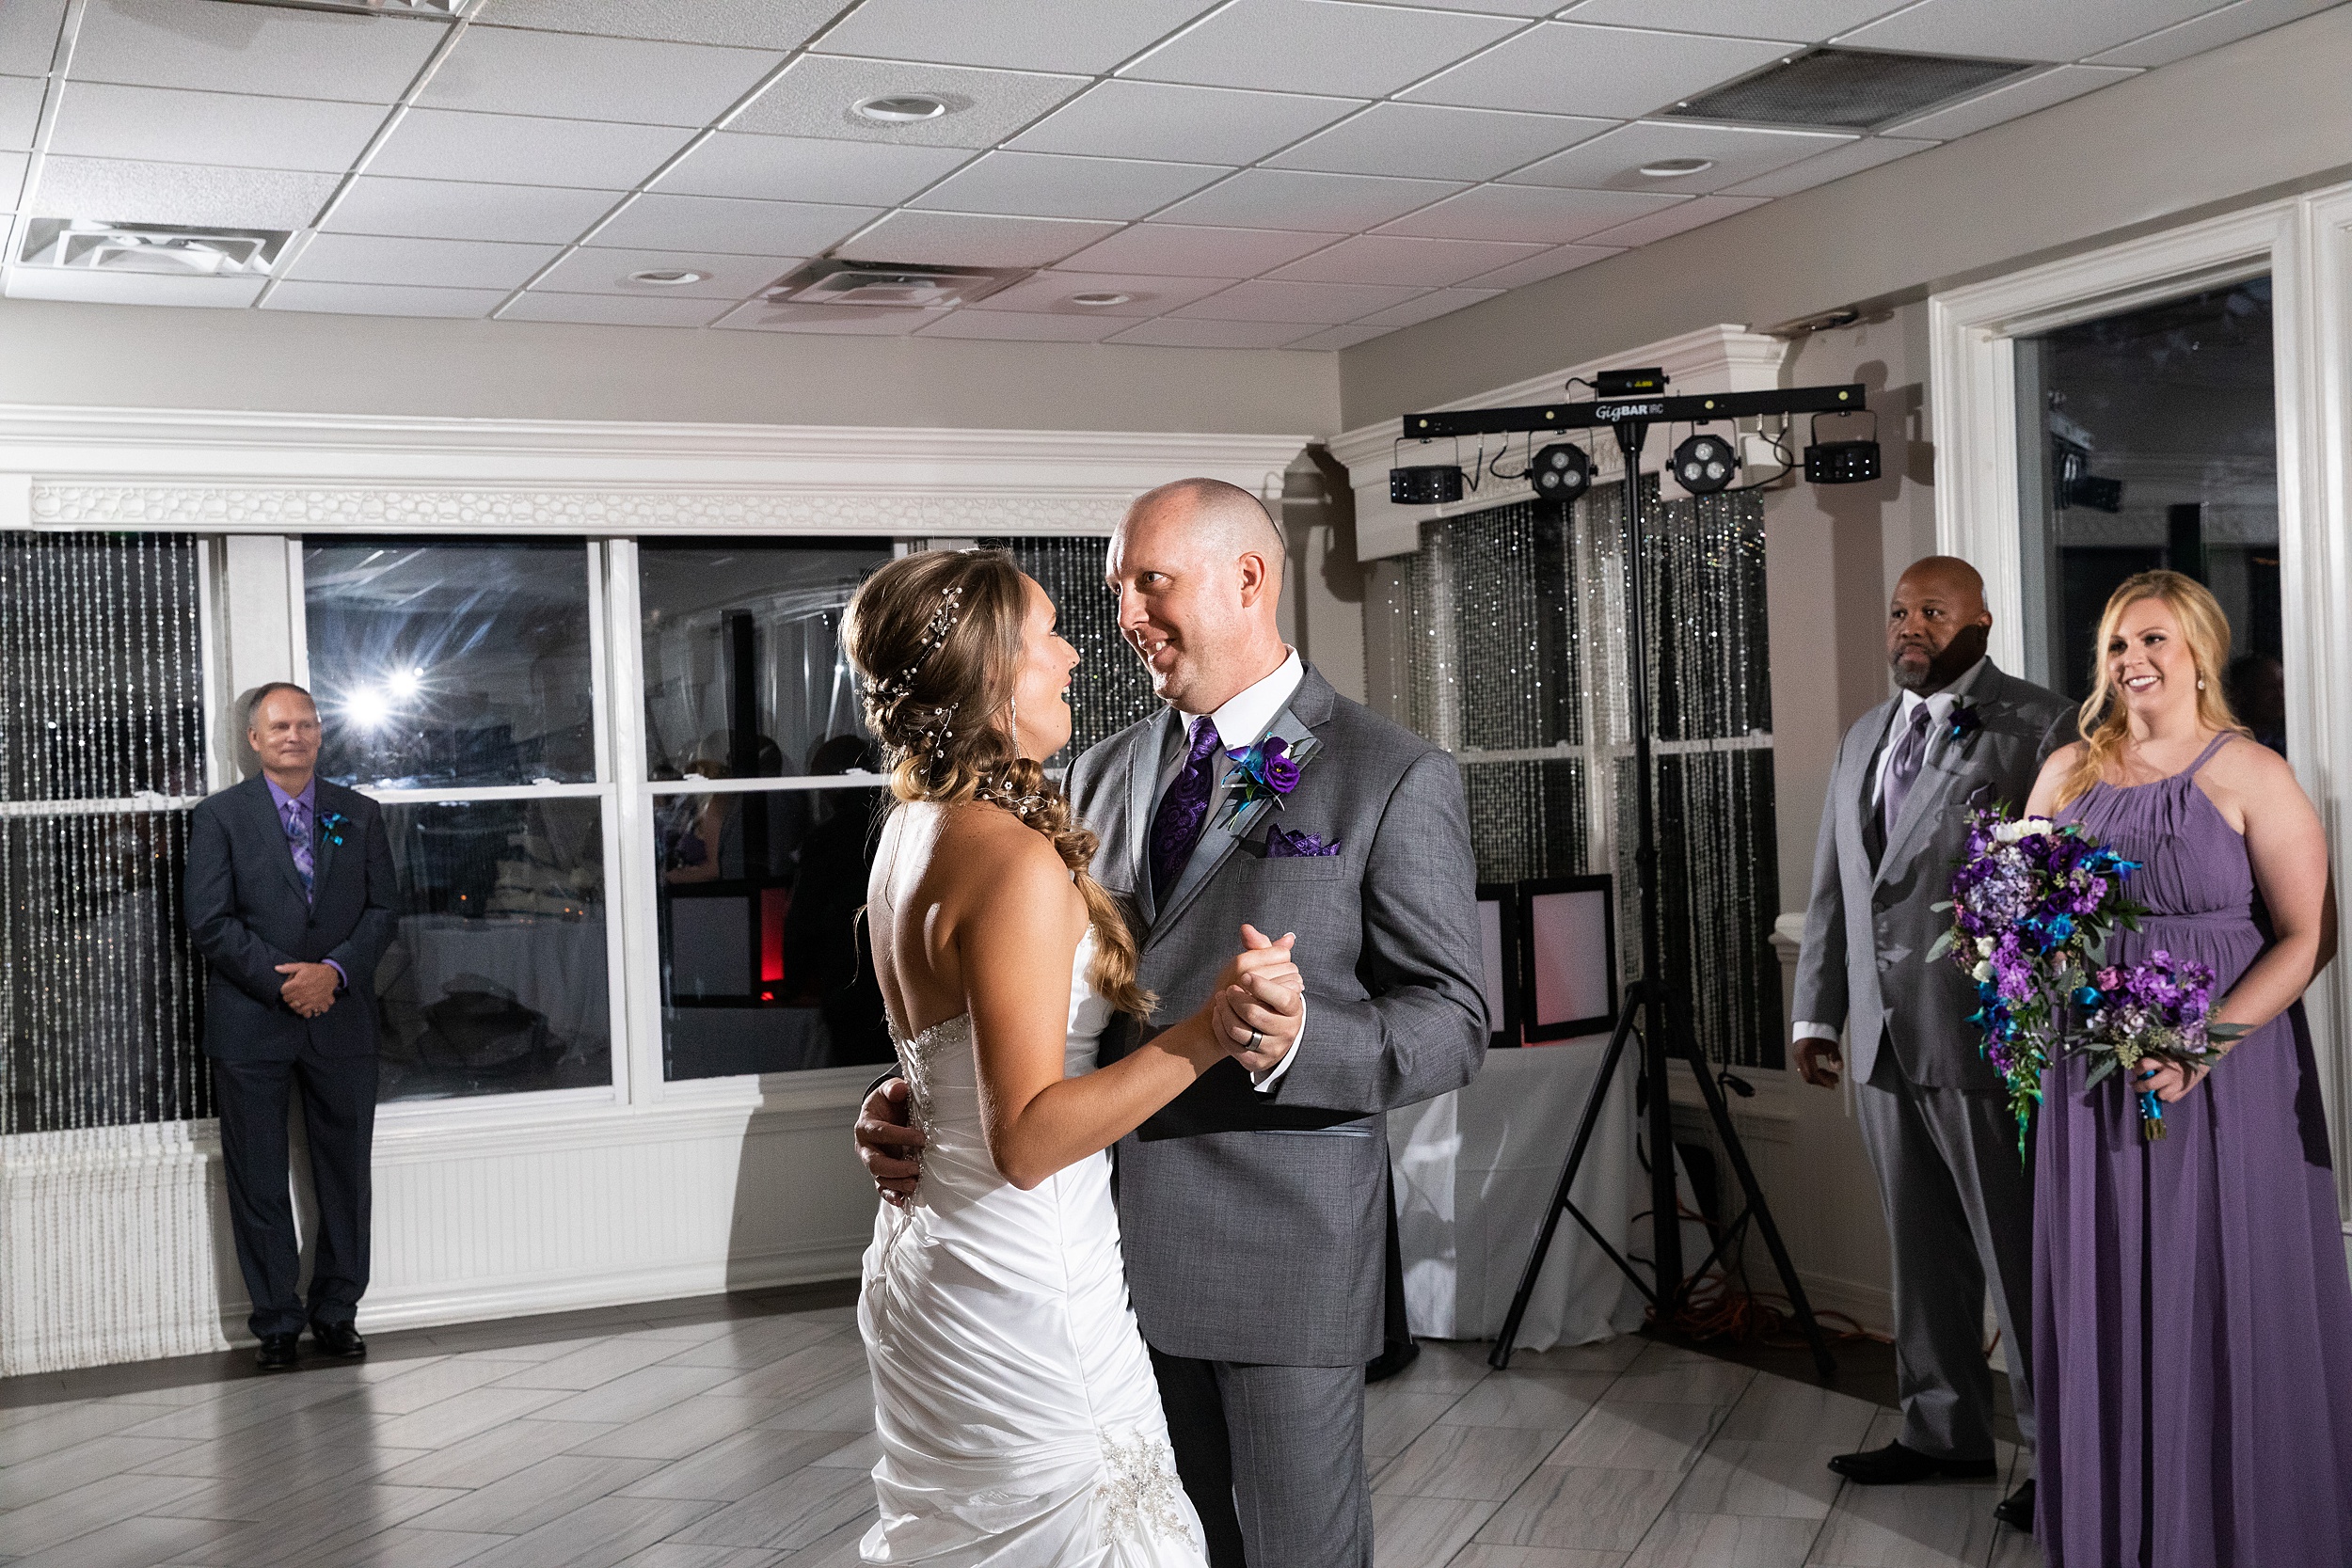 Newlyweds dance for the first time on the dance floor at their magnolia point wedding